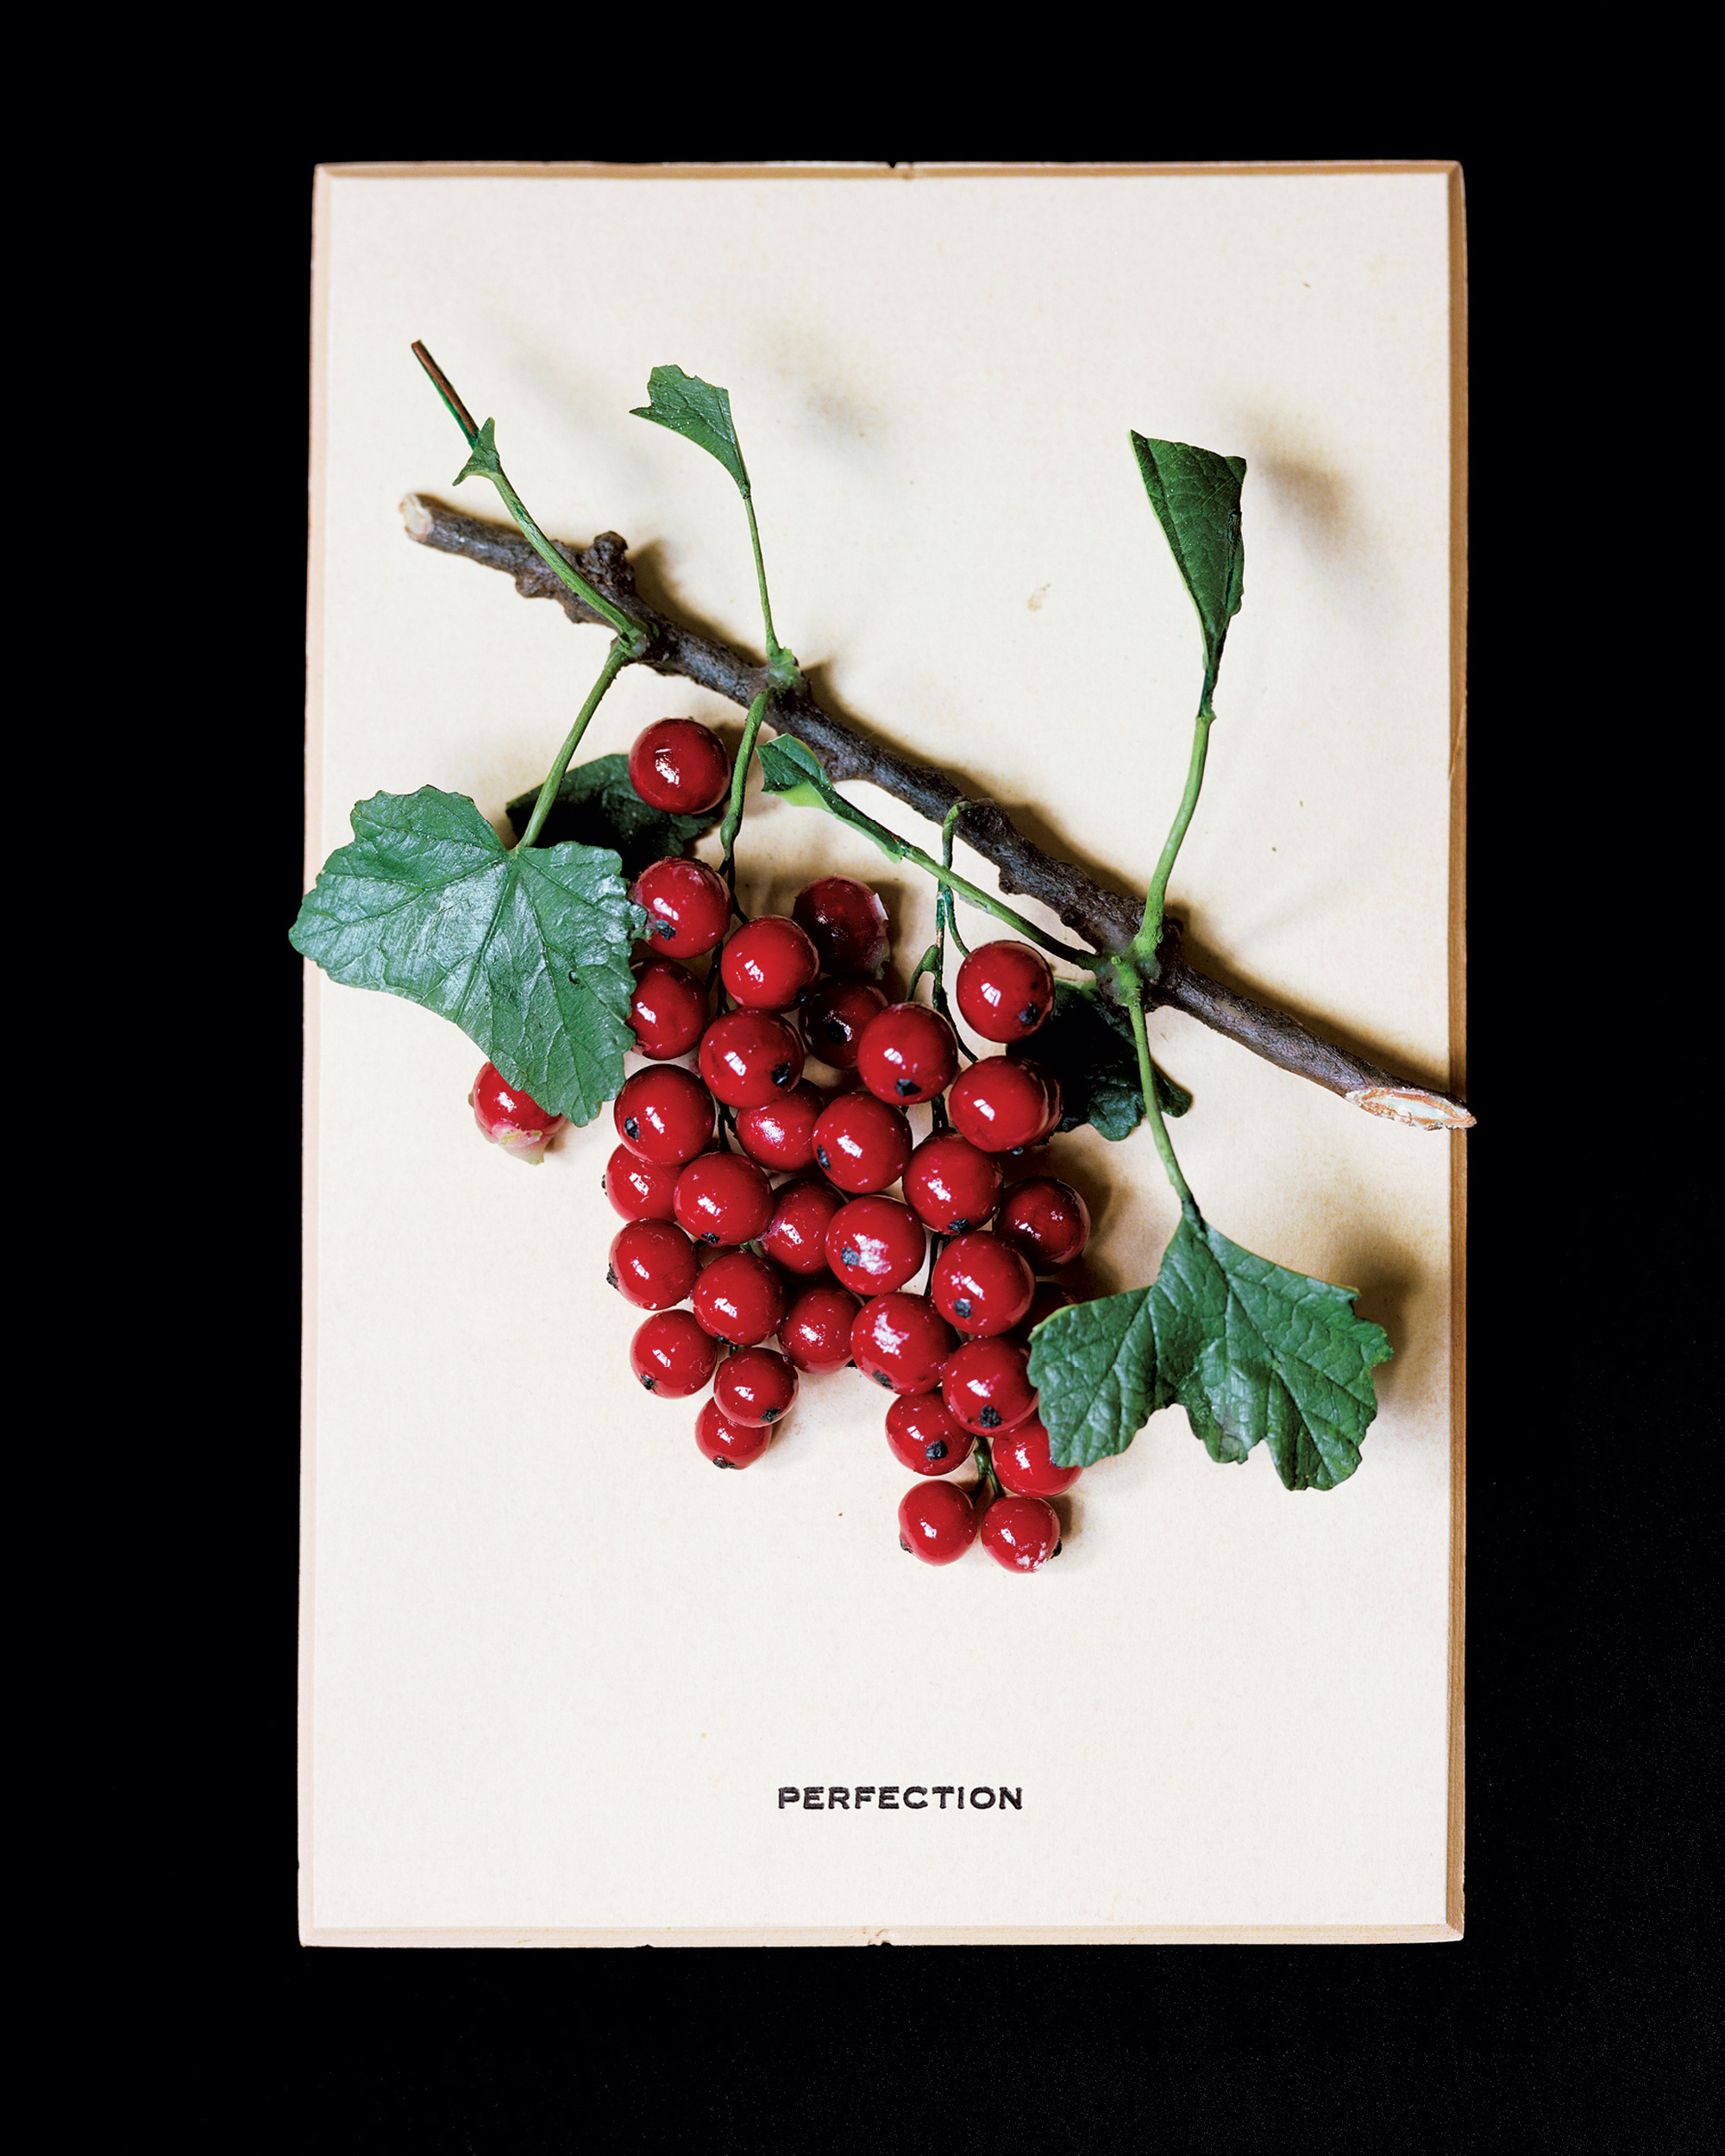 A two thousand and nine wax agricultural model of berries on a branch titled “Perfection.”